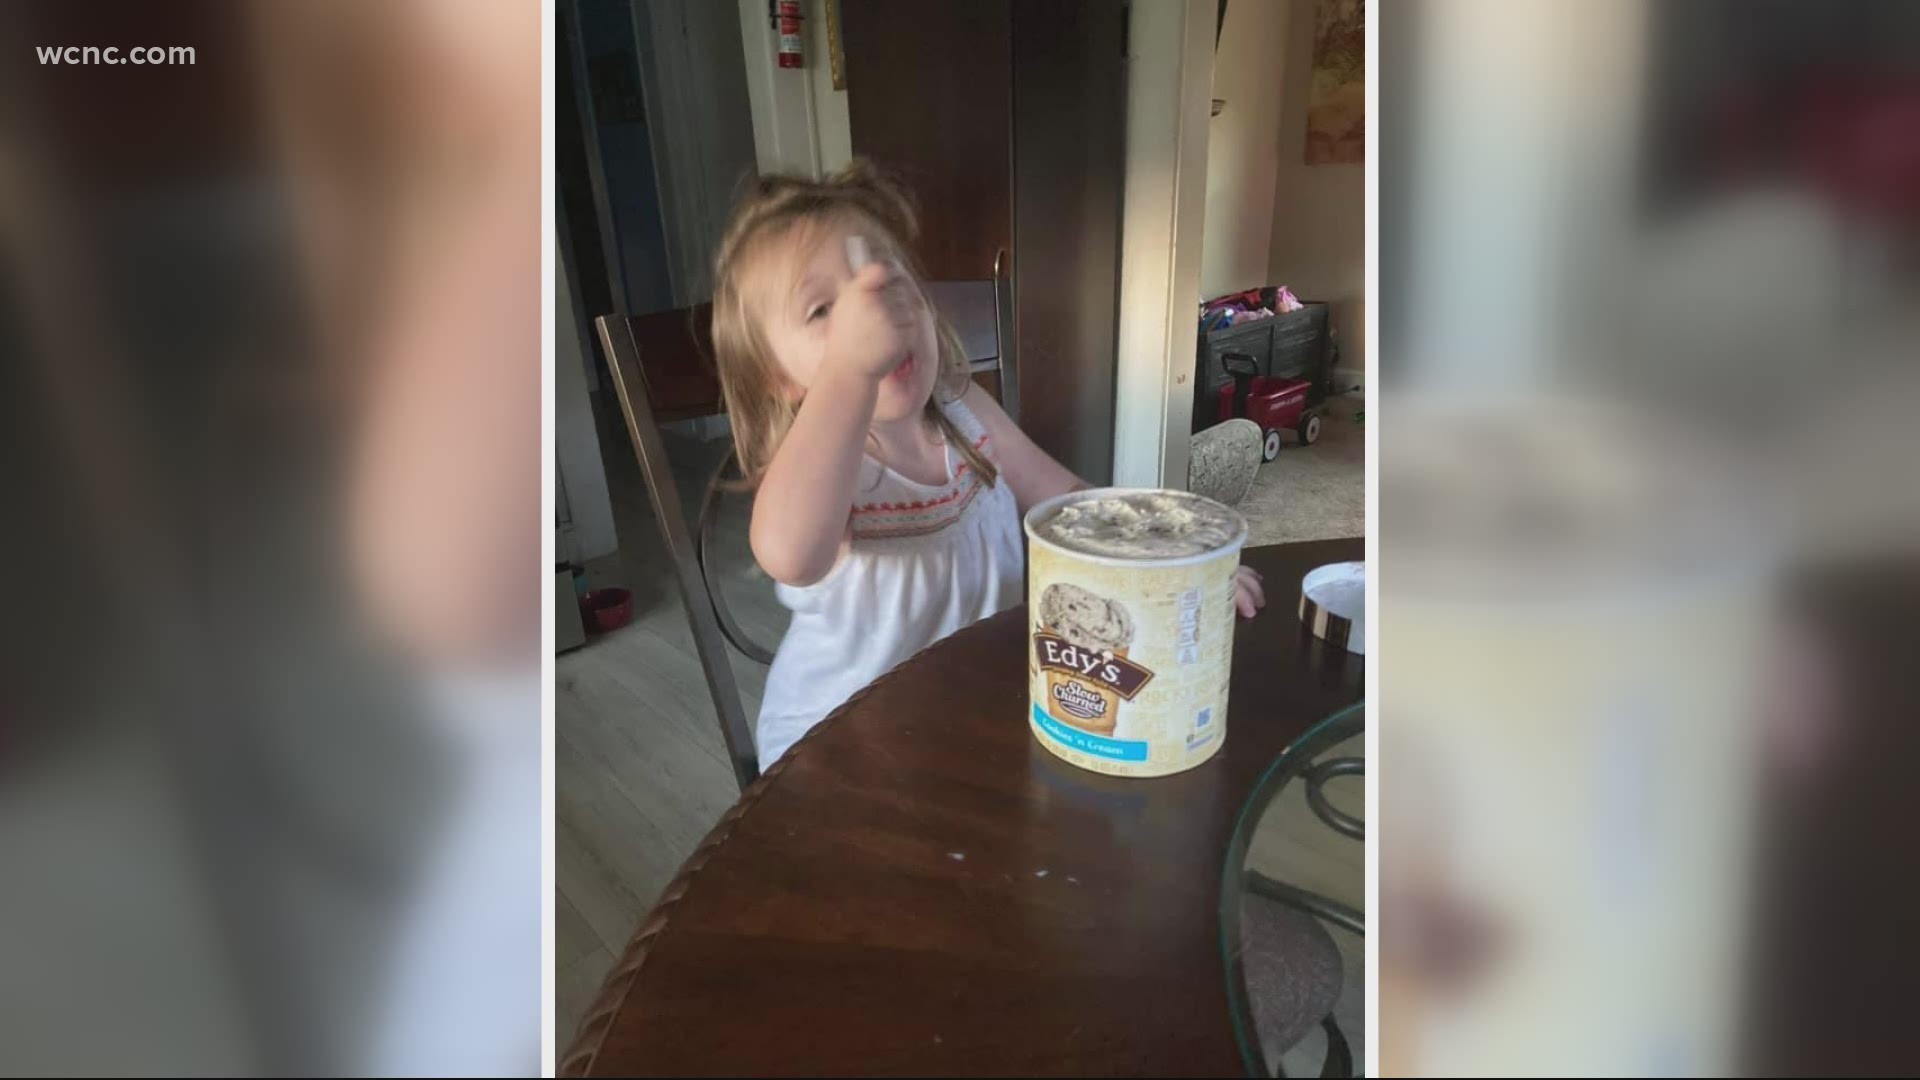 Riley's 'pa pa' died back in April from COVID-19, but her mom said her young daughter still couldn't grasp the concept that he couldn't get her ice cream.